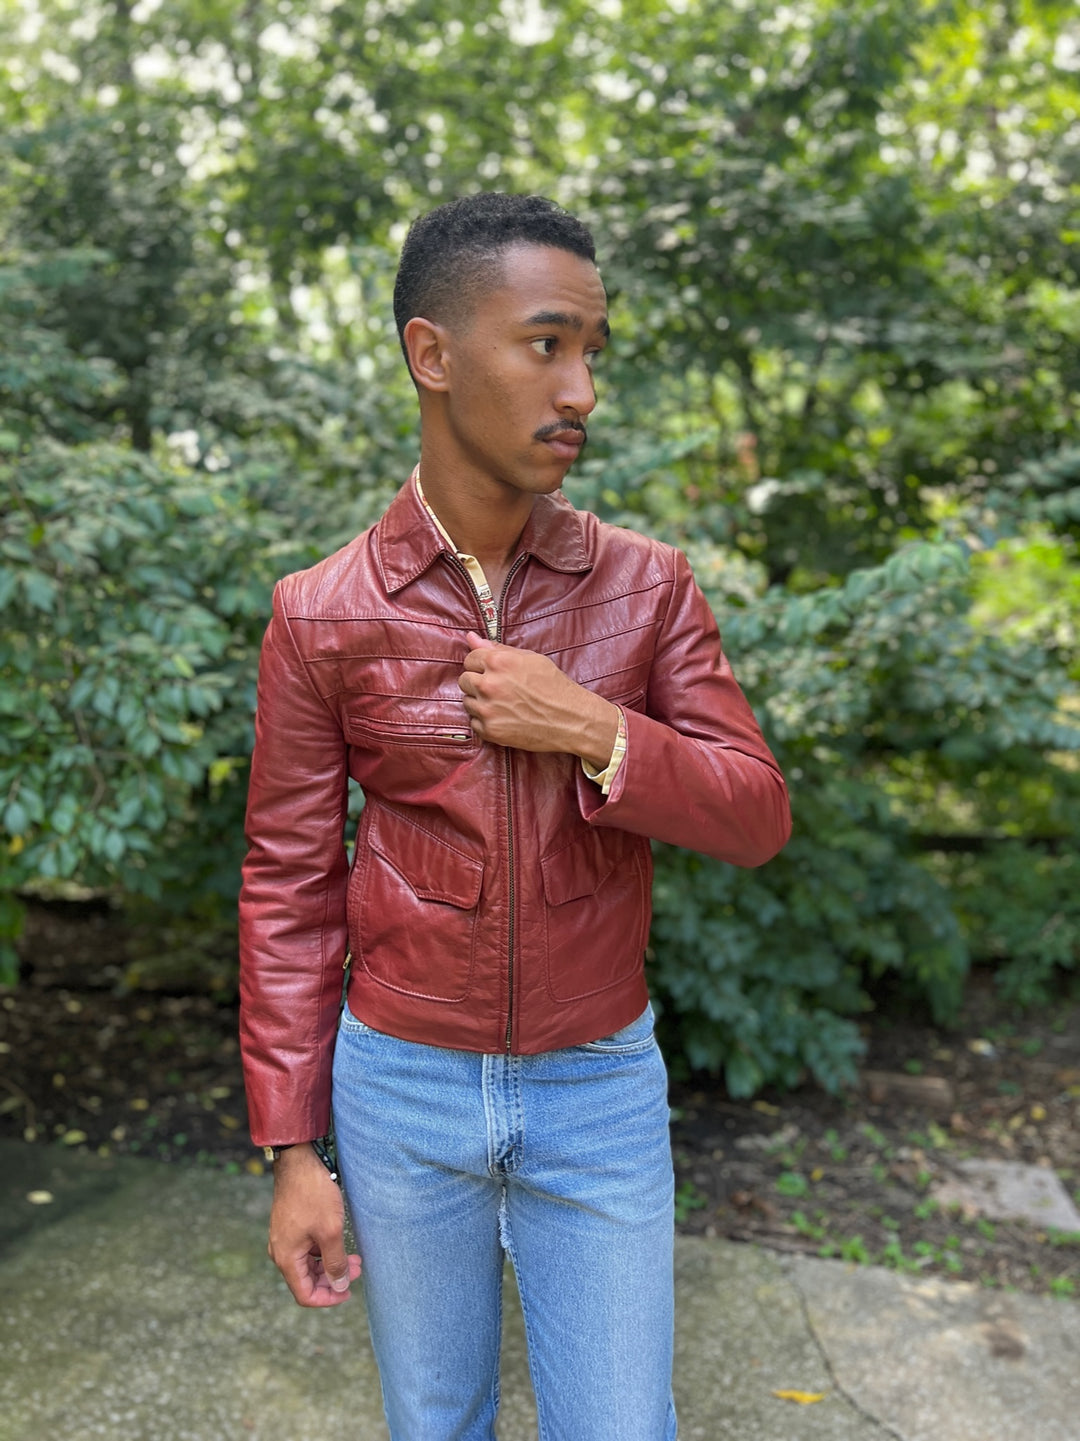 Vintage Oxblood Brown Leather Jacket, Chess King